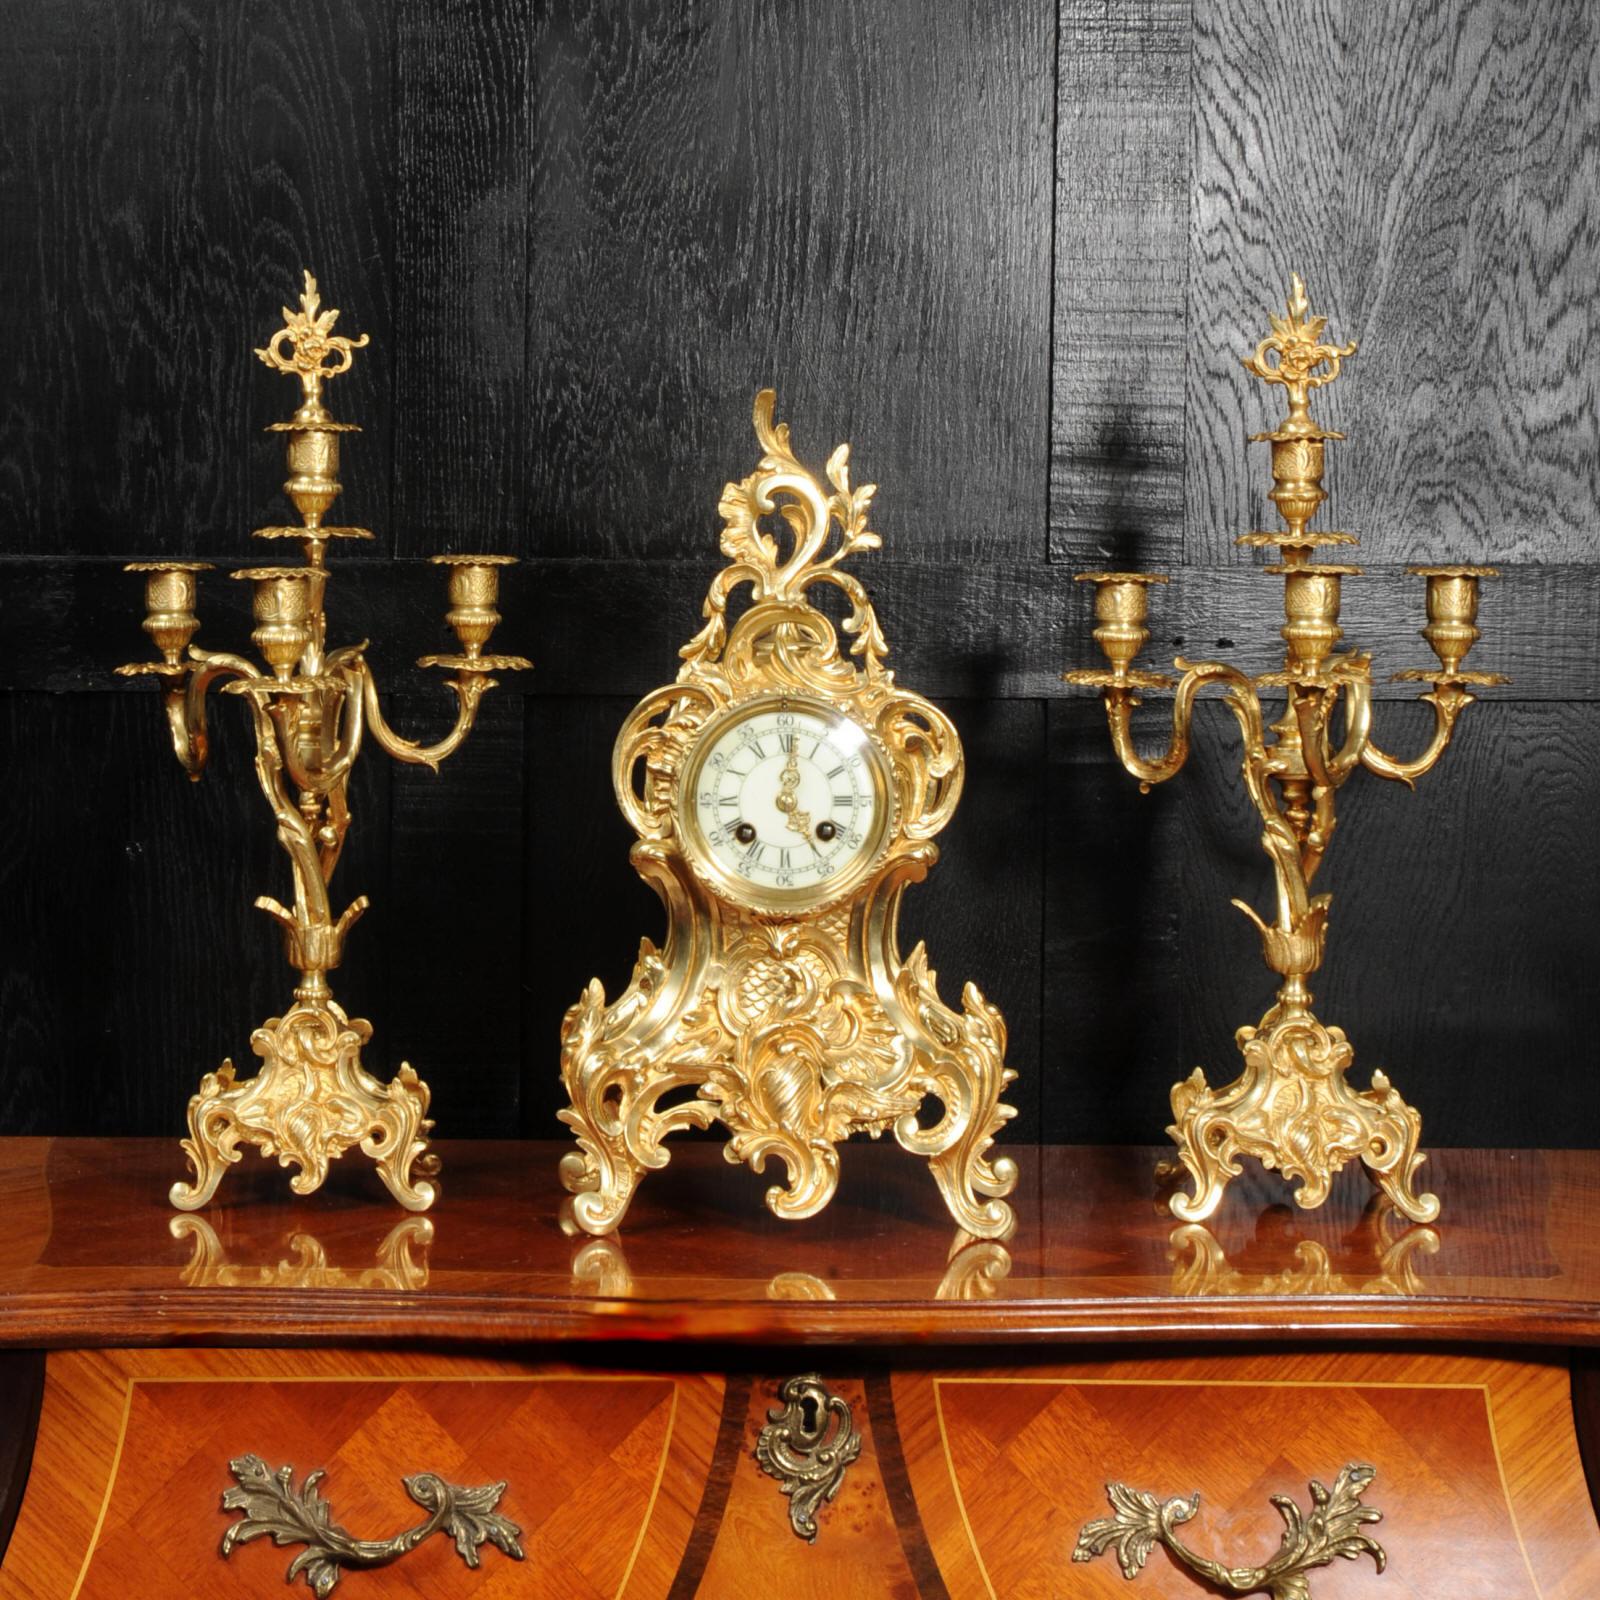 A beautiful original antique French Rococo clock set by Verger Freres of Paris and A. D. Mougin. it is finely modelled with a flamboyantly waisted case covered in C-scrolls and entwined foliage. The candelabra are formed of twirling acanthus